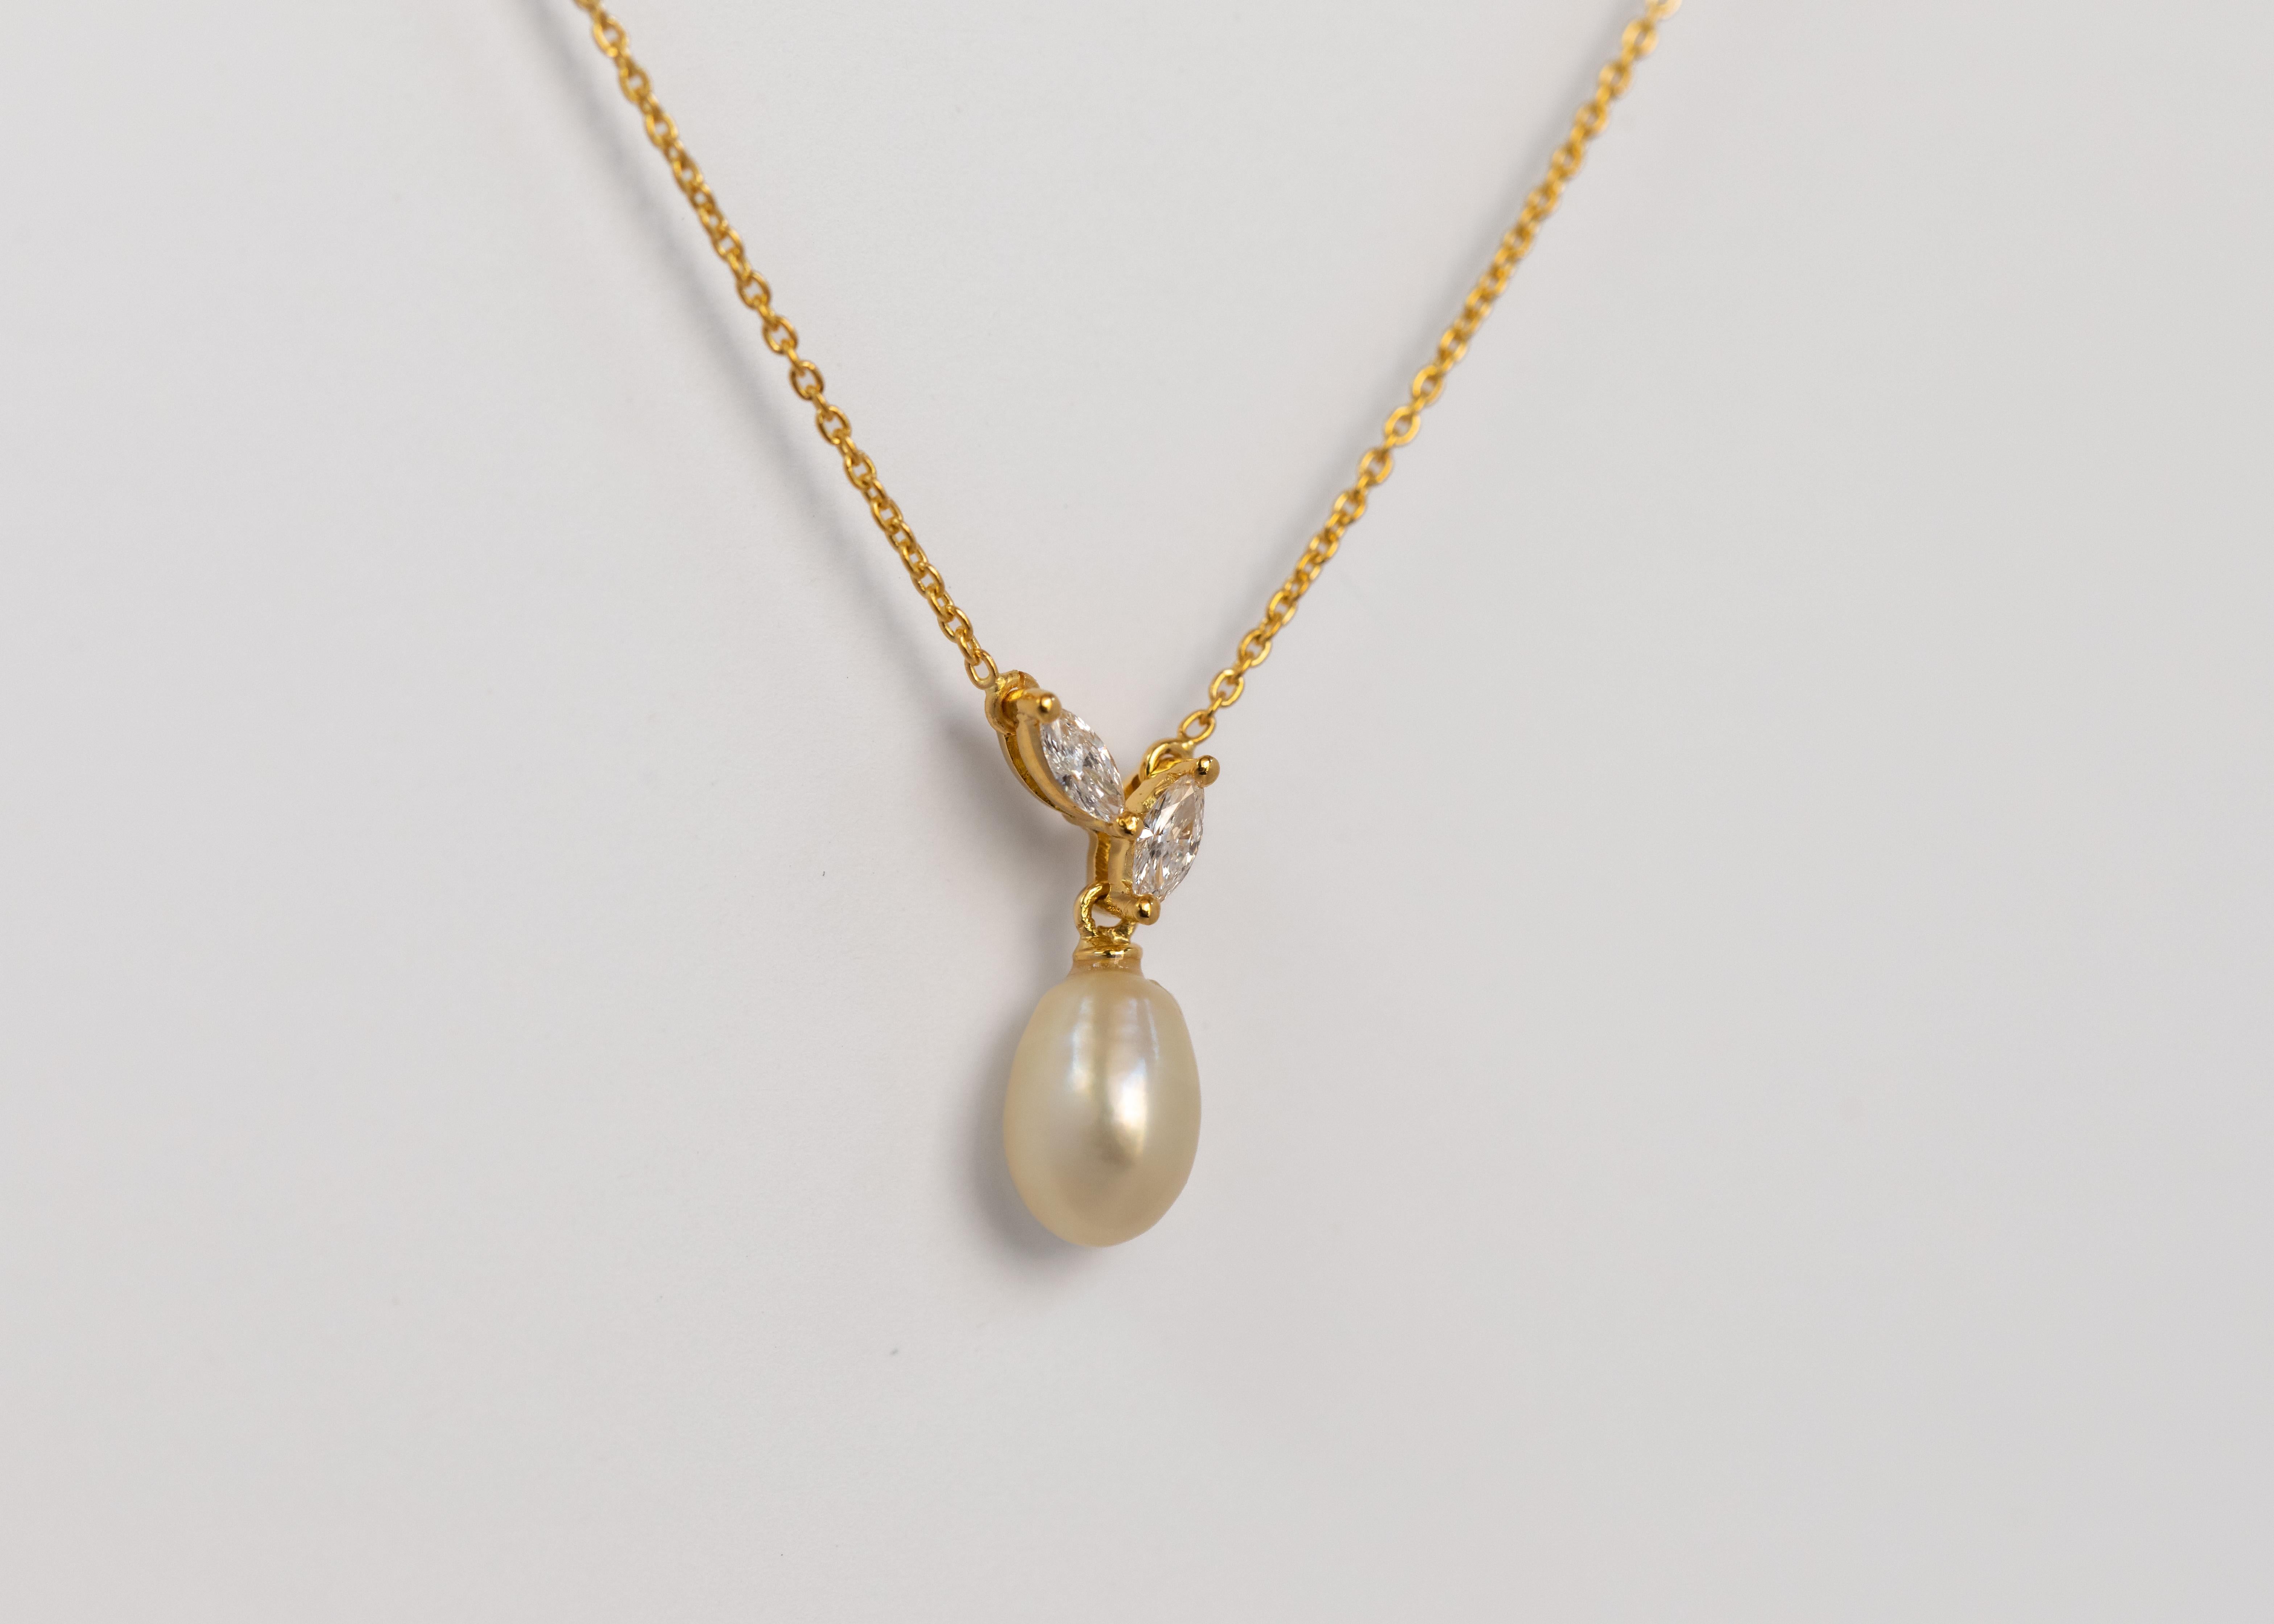 A must have in every women's collection, a classic pearl drop pendant.
The 2.8 ct. cream coloured natural Bahraini pearl is attached to 2 marquise diamonds, hanging from an 18 kt. yellow gold chain.

The pearl is certified from the top rated pearl